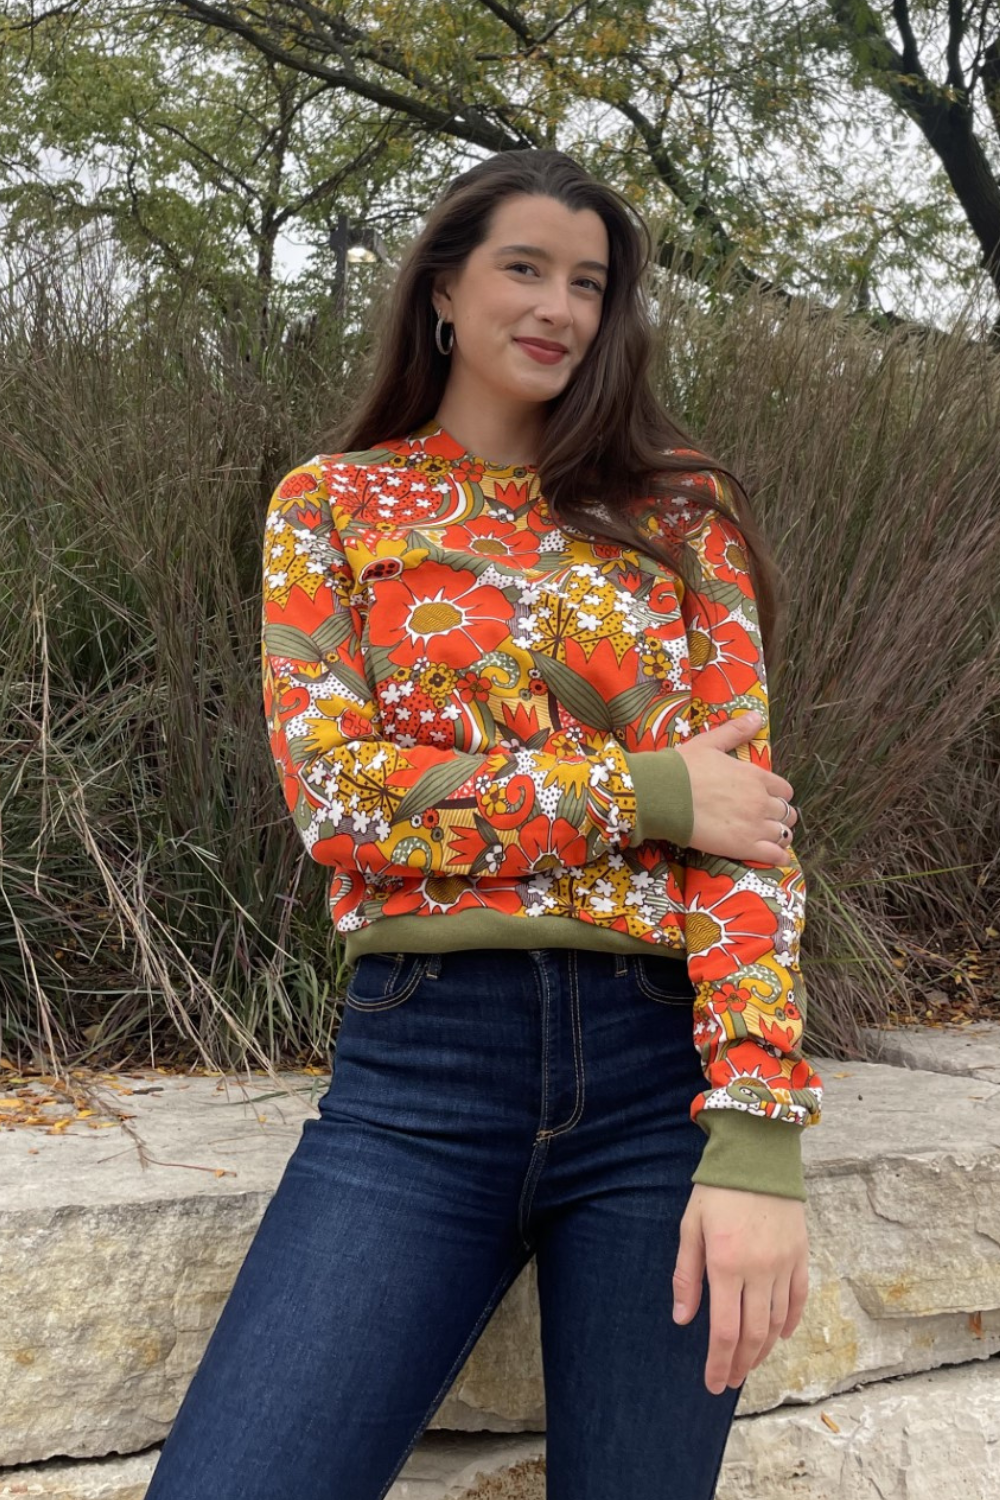 Long-haired tall model with big floral print cropped sweatshirt